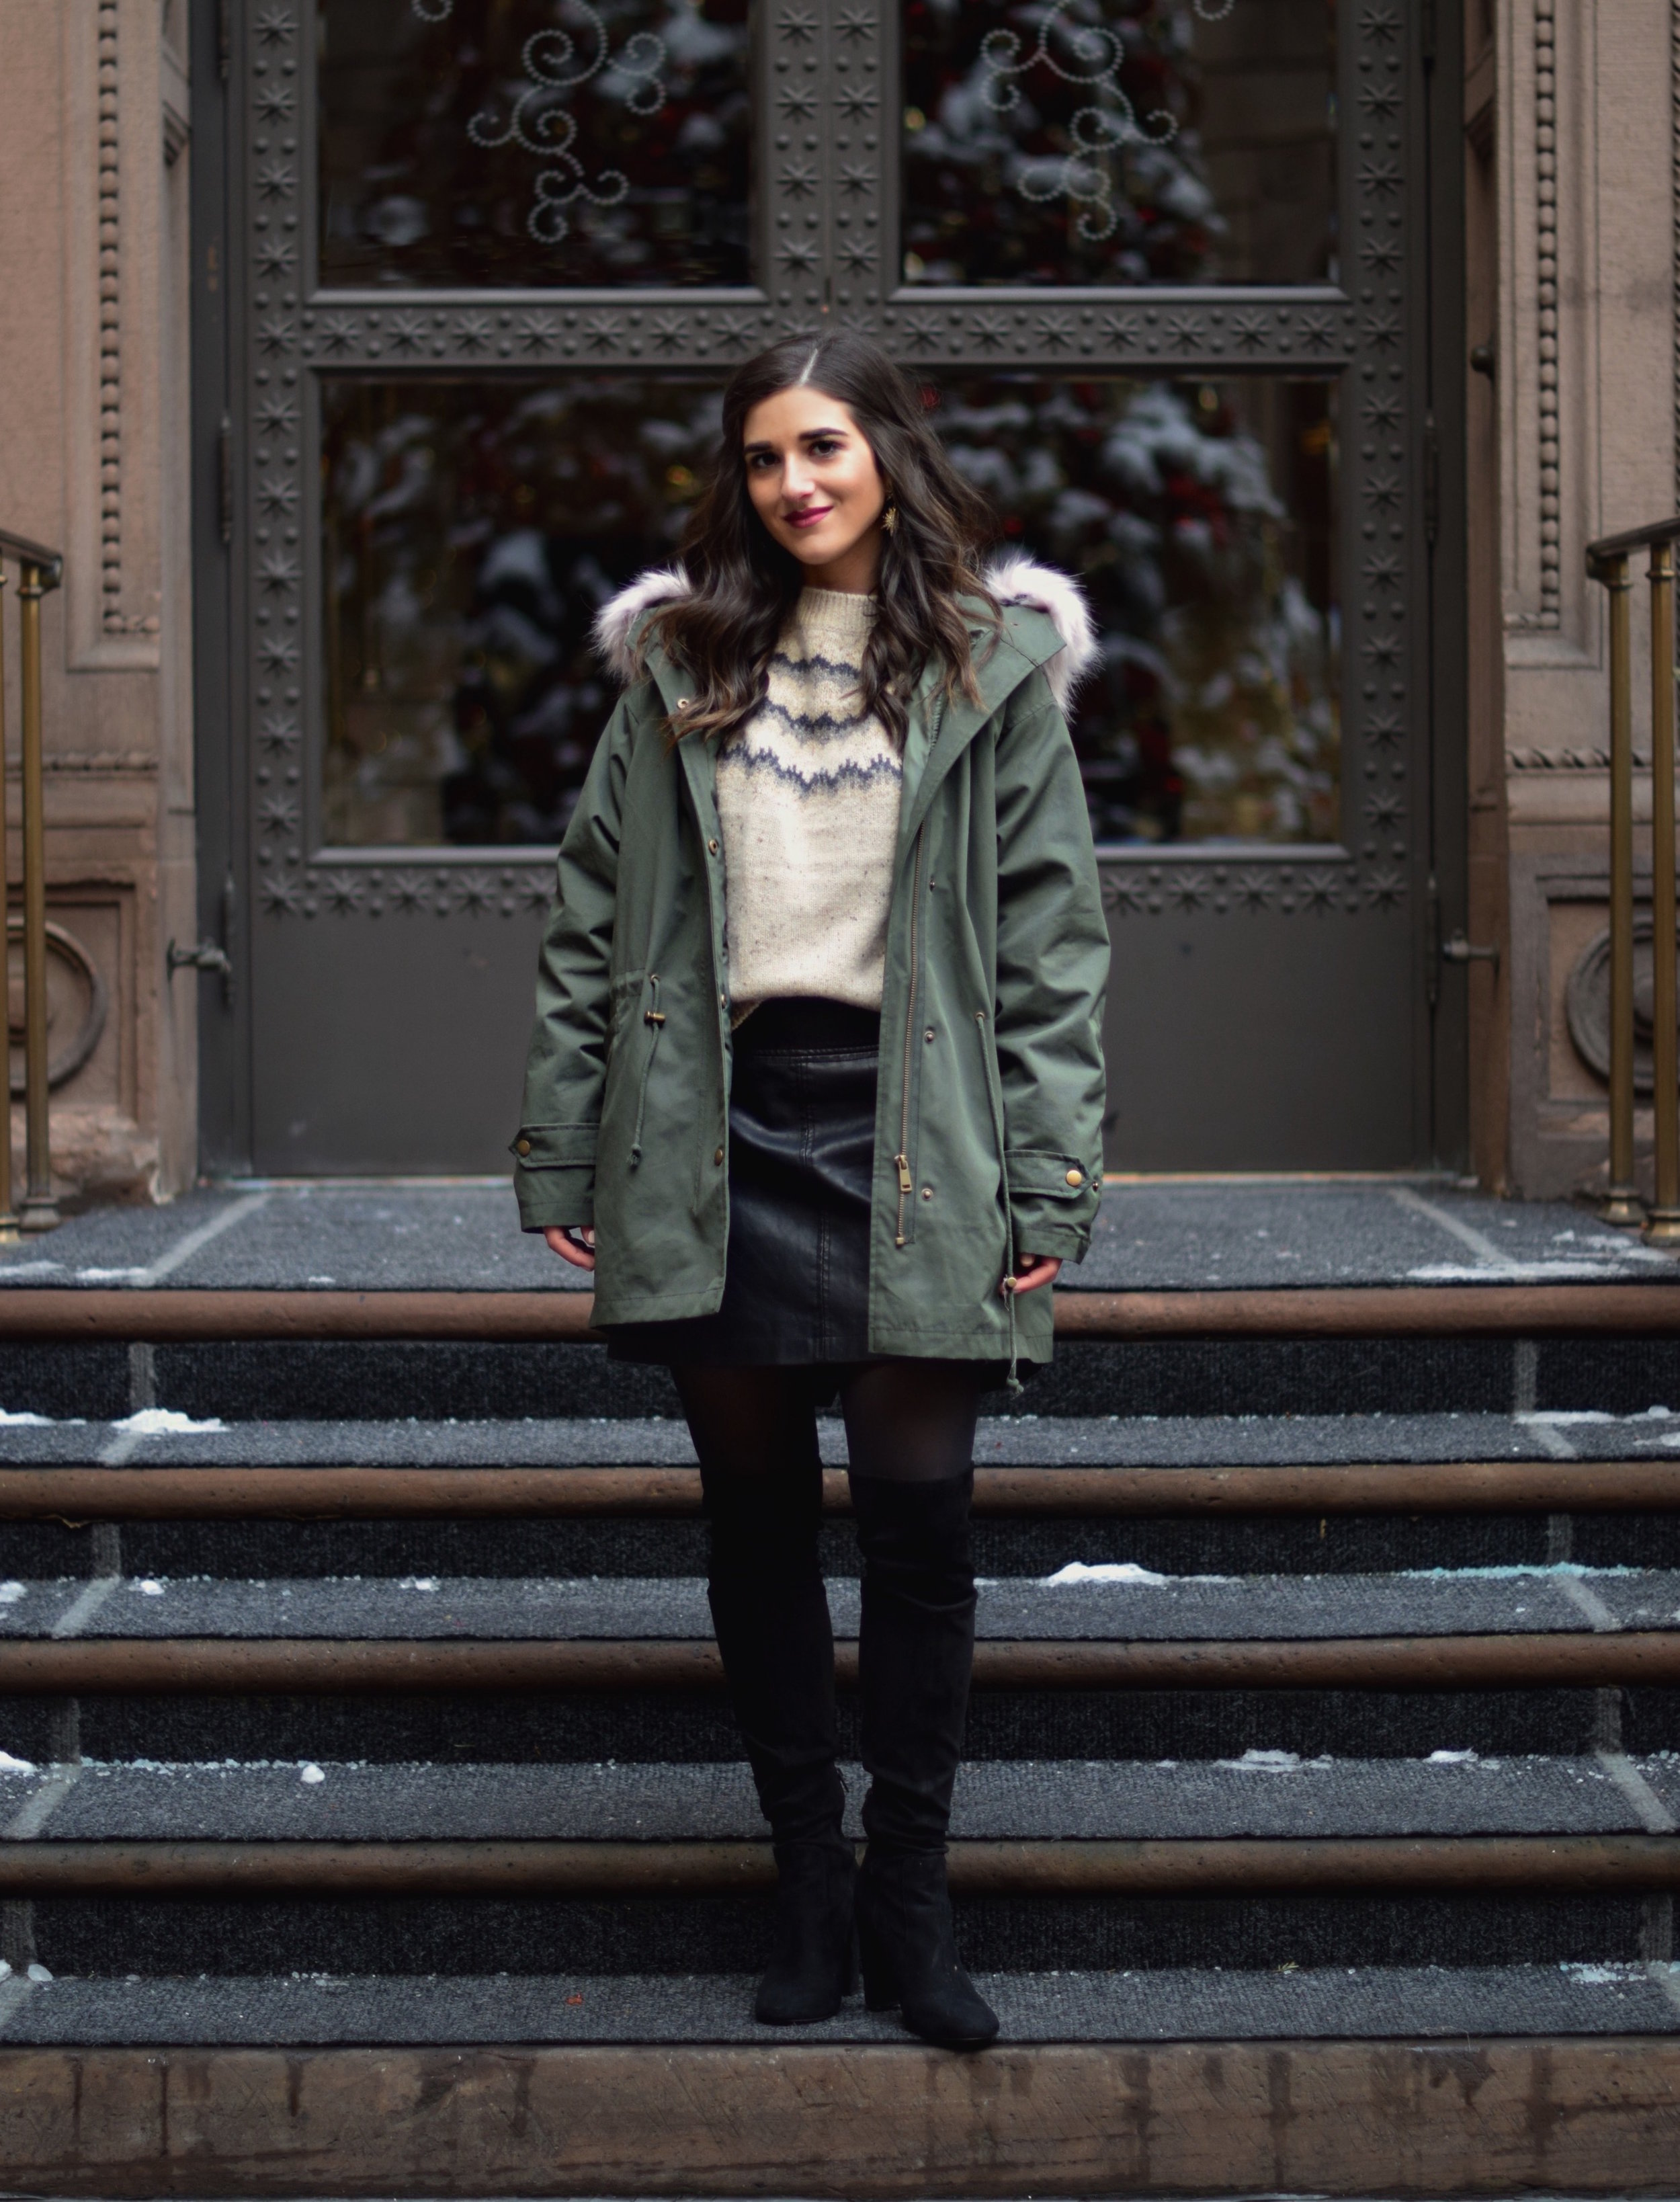 The Perfect Parka 10 Coats To Gift This Season Esther Santer Fashion Blog NYC Street Style Blogger Outfit OOTD Trendy Urban Outfitters Jacket Coat Girl Women Fur Hood Winter Black OTK Boots Cashmere Sweater Cold Weather Shoes Shopping Holiday Presents.jpg